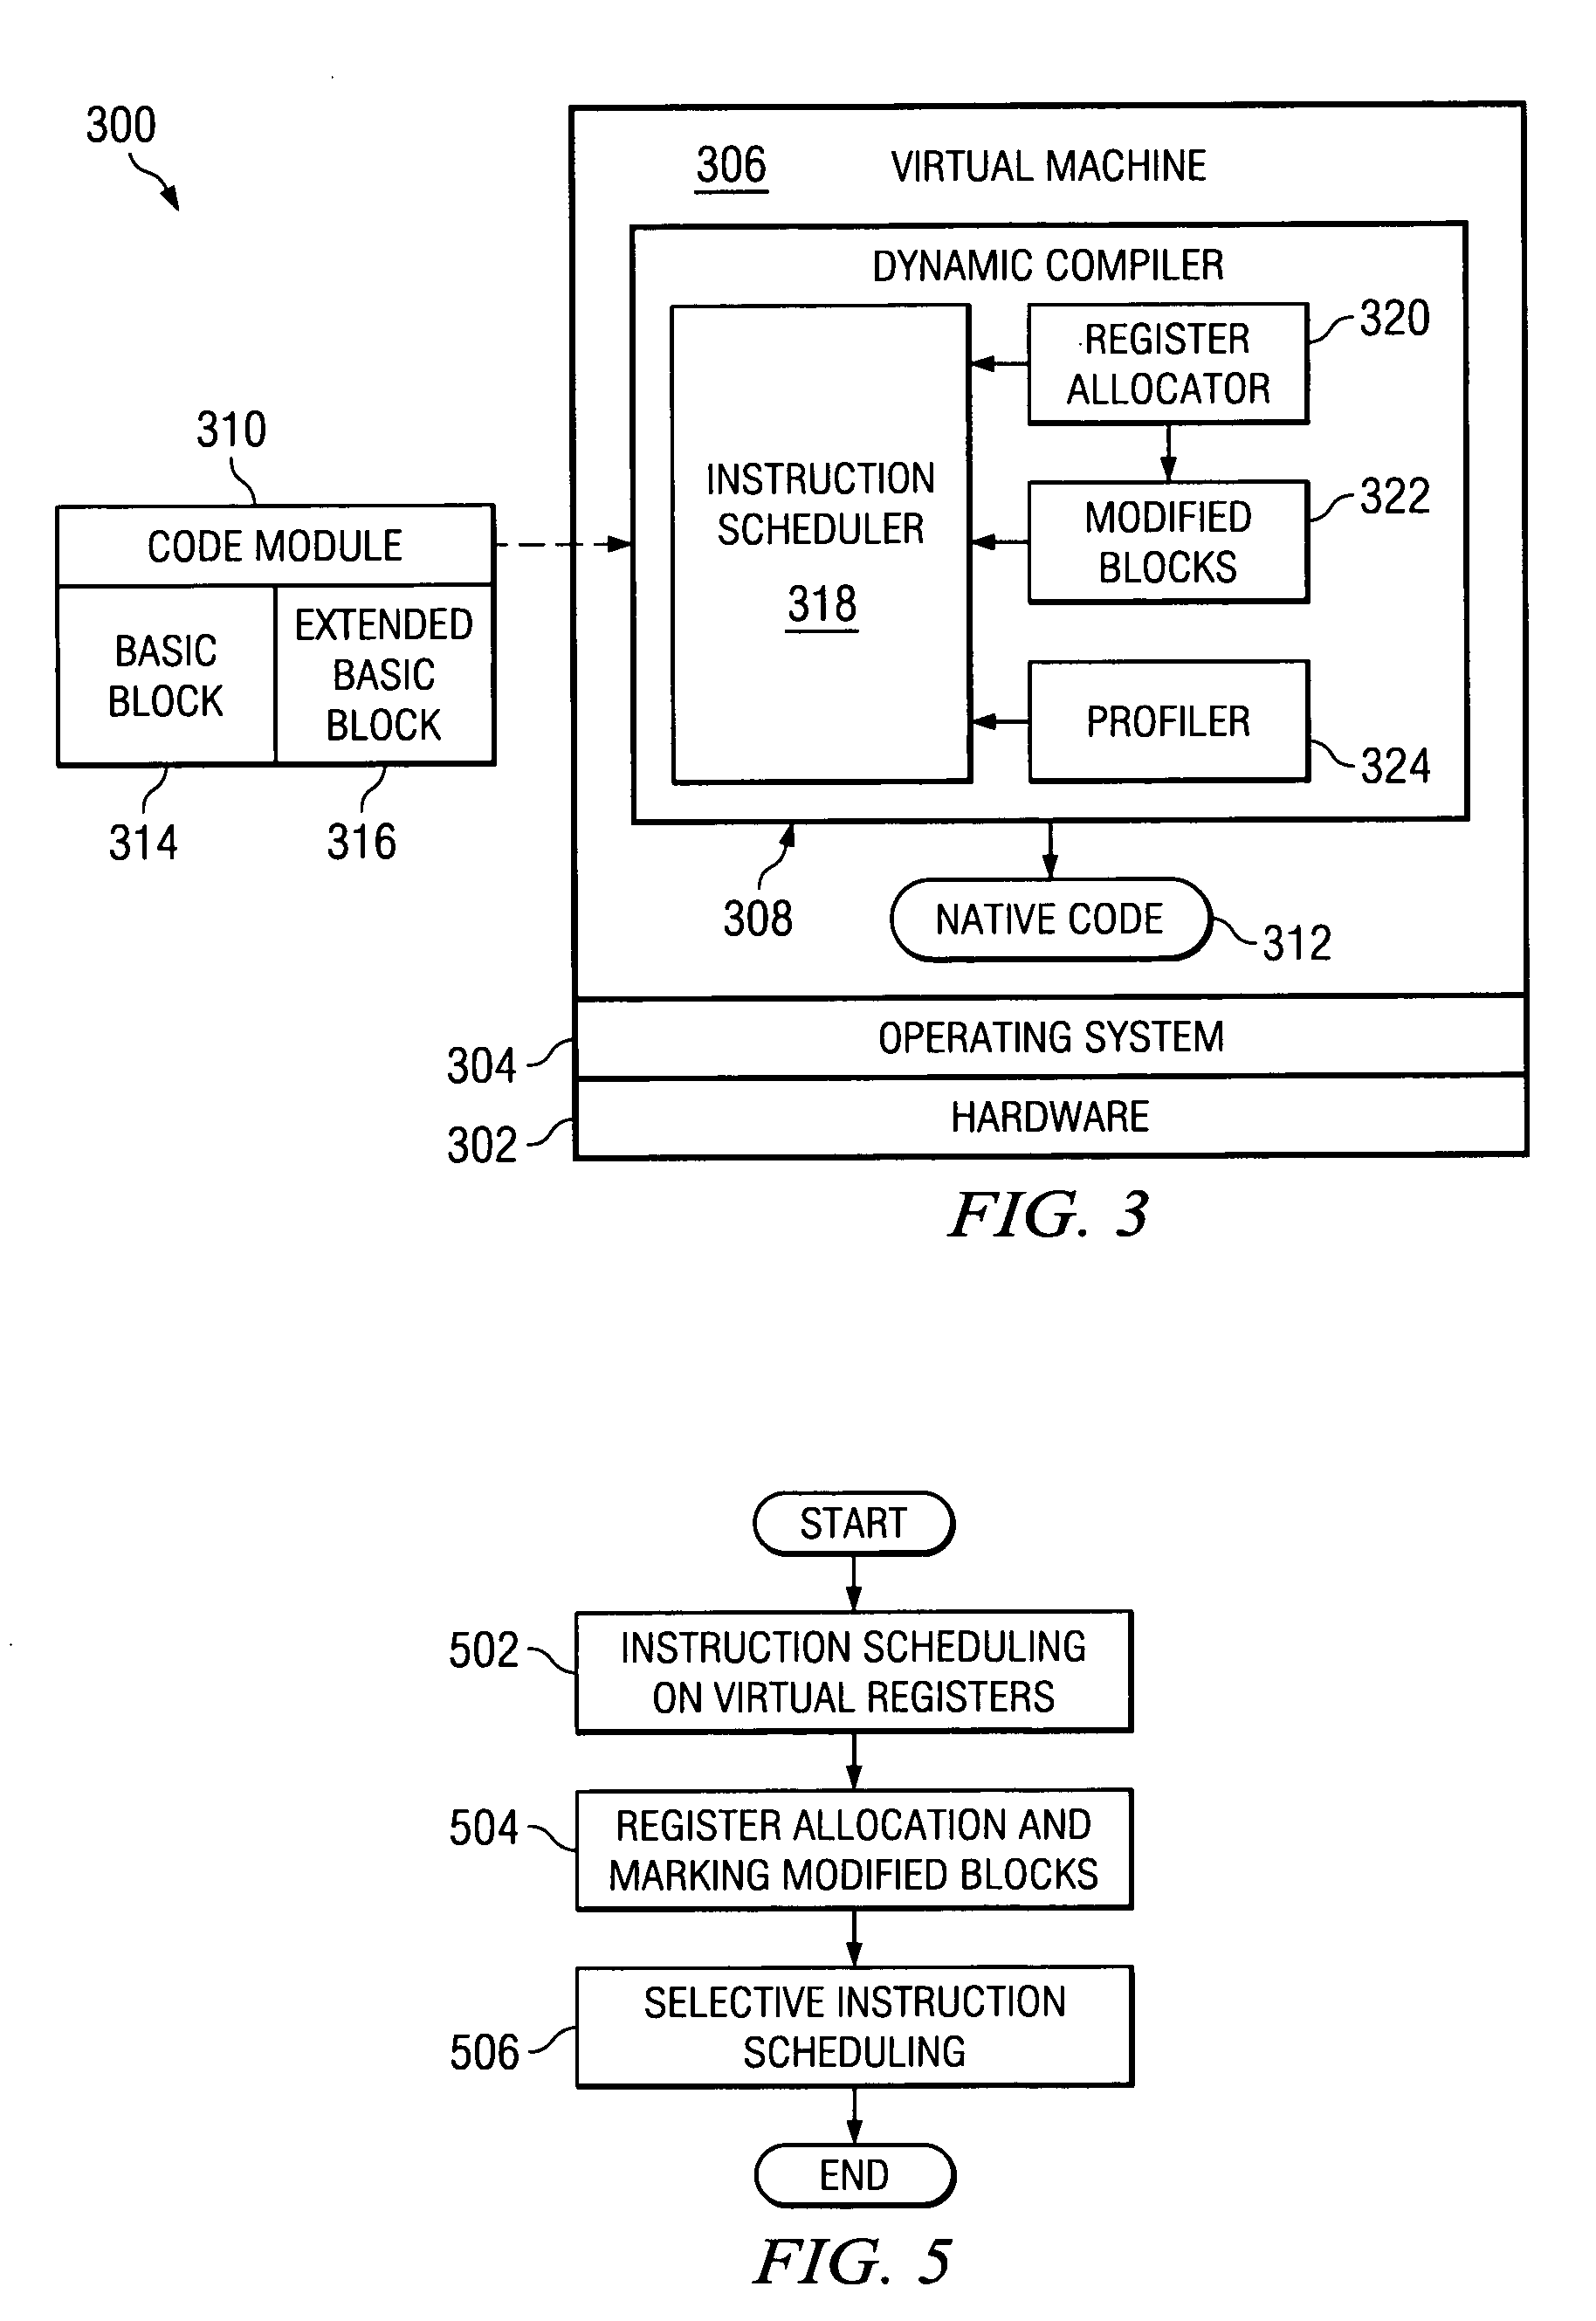 Post-register allocation profile directed instruction scheduling